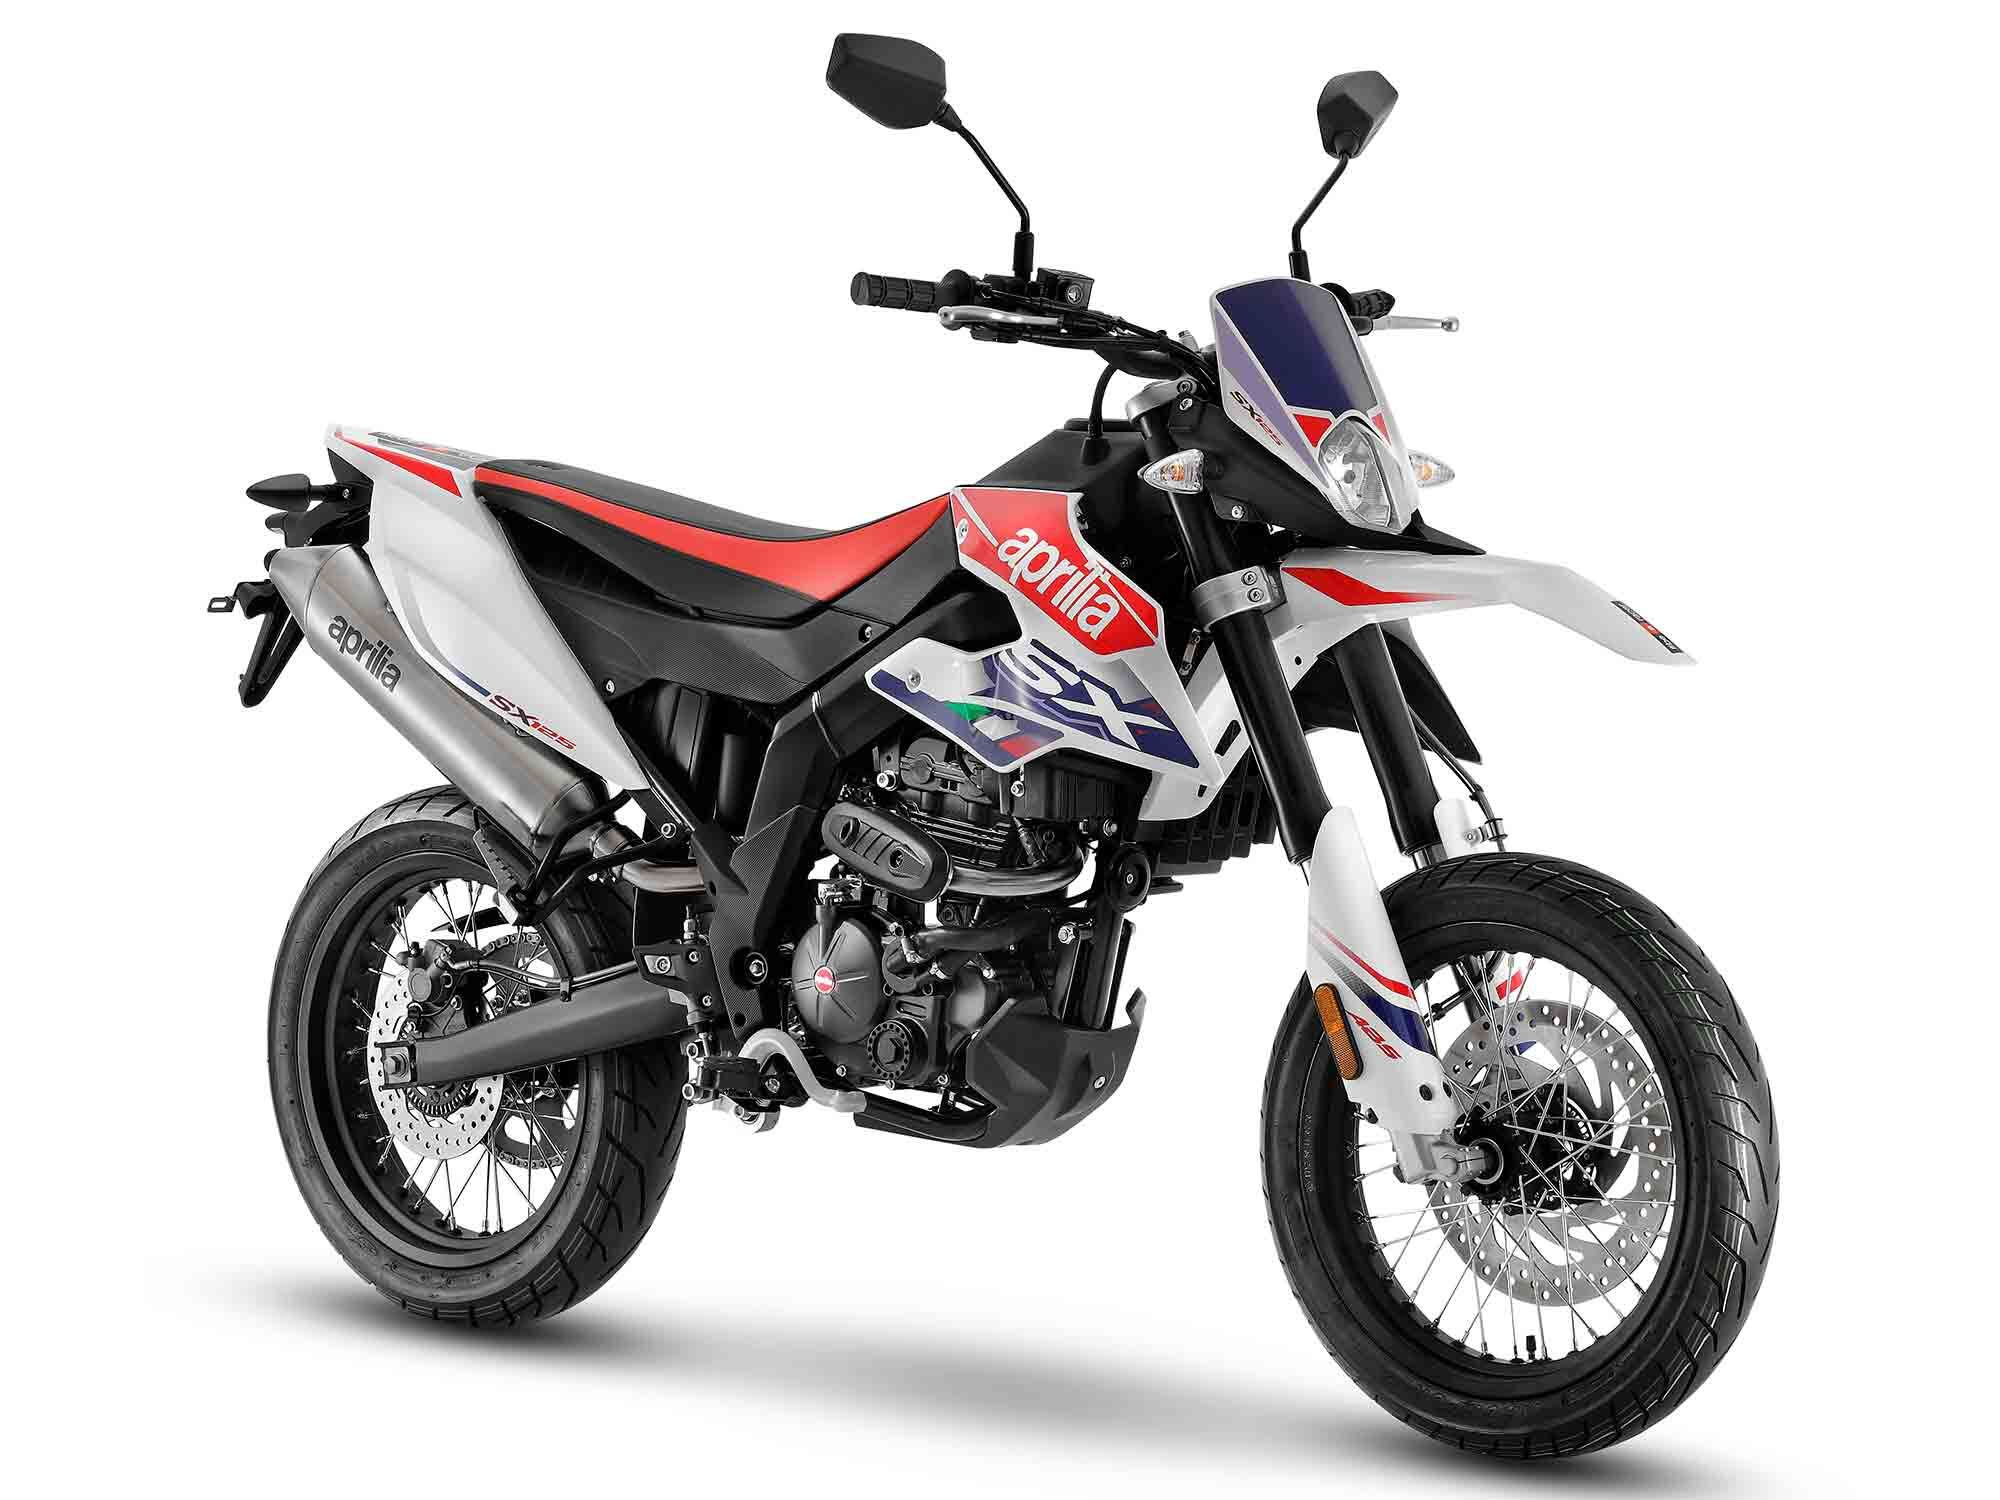 The Aprilia SX 125 is available in Rally Tribute livery for 2021.